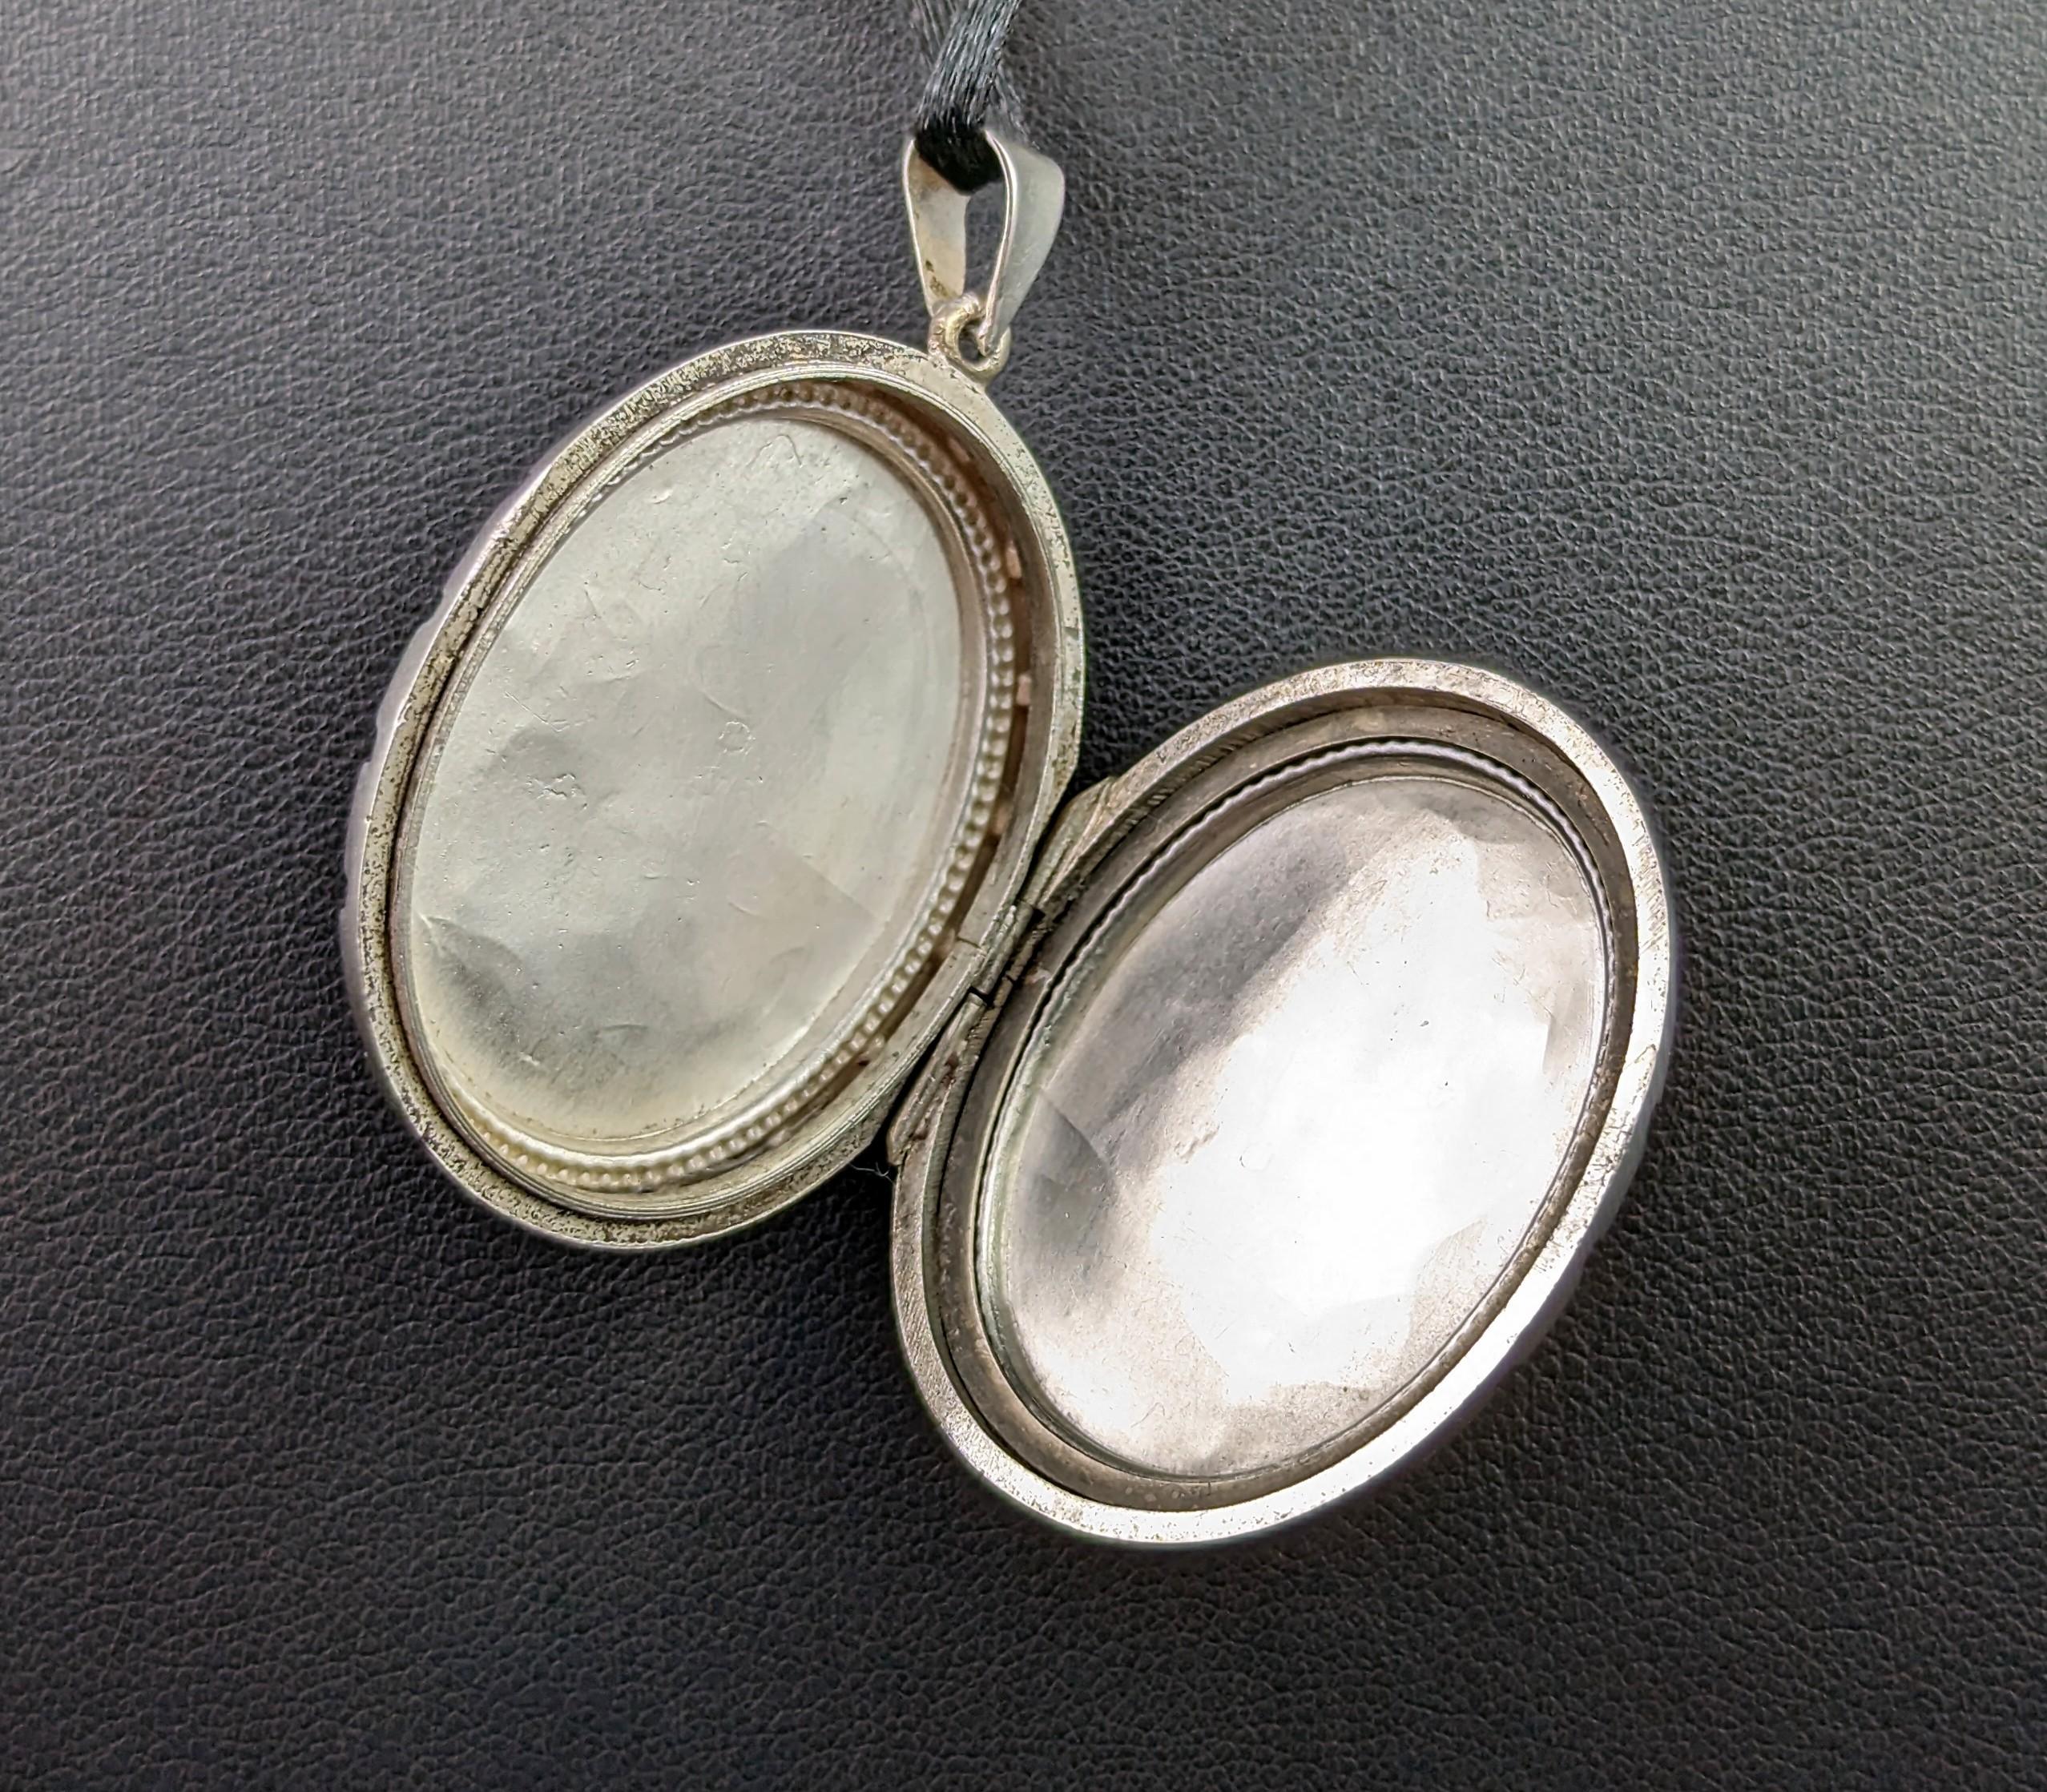 Victorian Aesthetic Era Locket, Sterling Silver and 9k Gold, Kingfisher 1